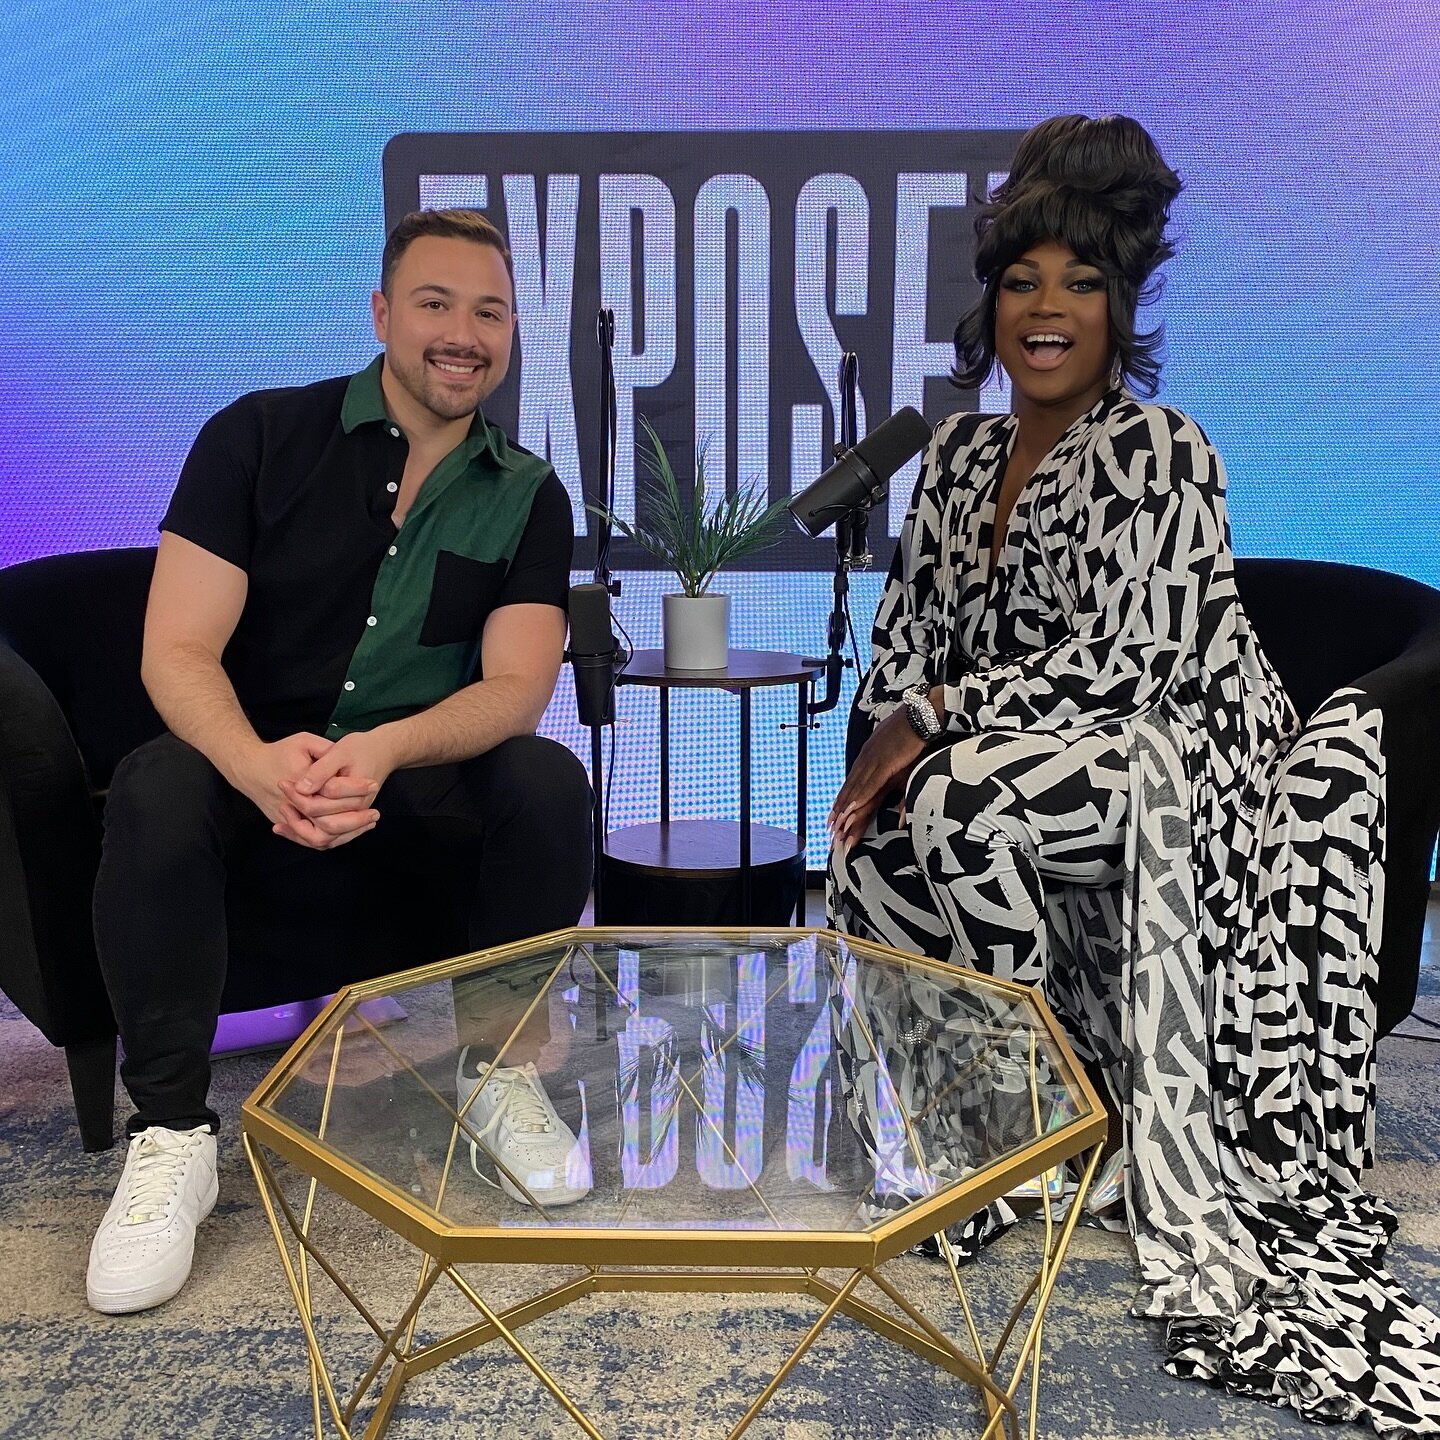 It&rsquo;s Mayhem Time! @theonlymayhem is this week&rsquo;s guest on Exposed. Watch the full episode on @outtv!